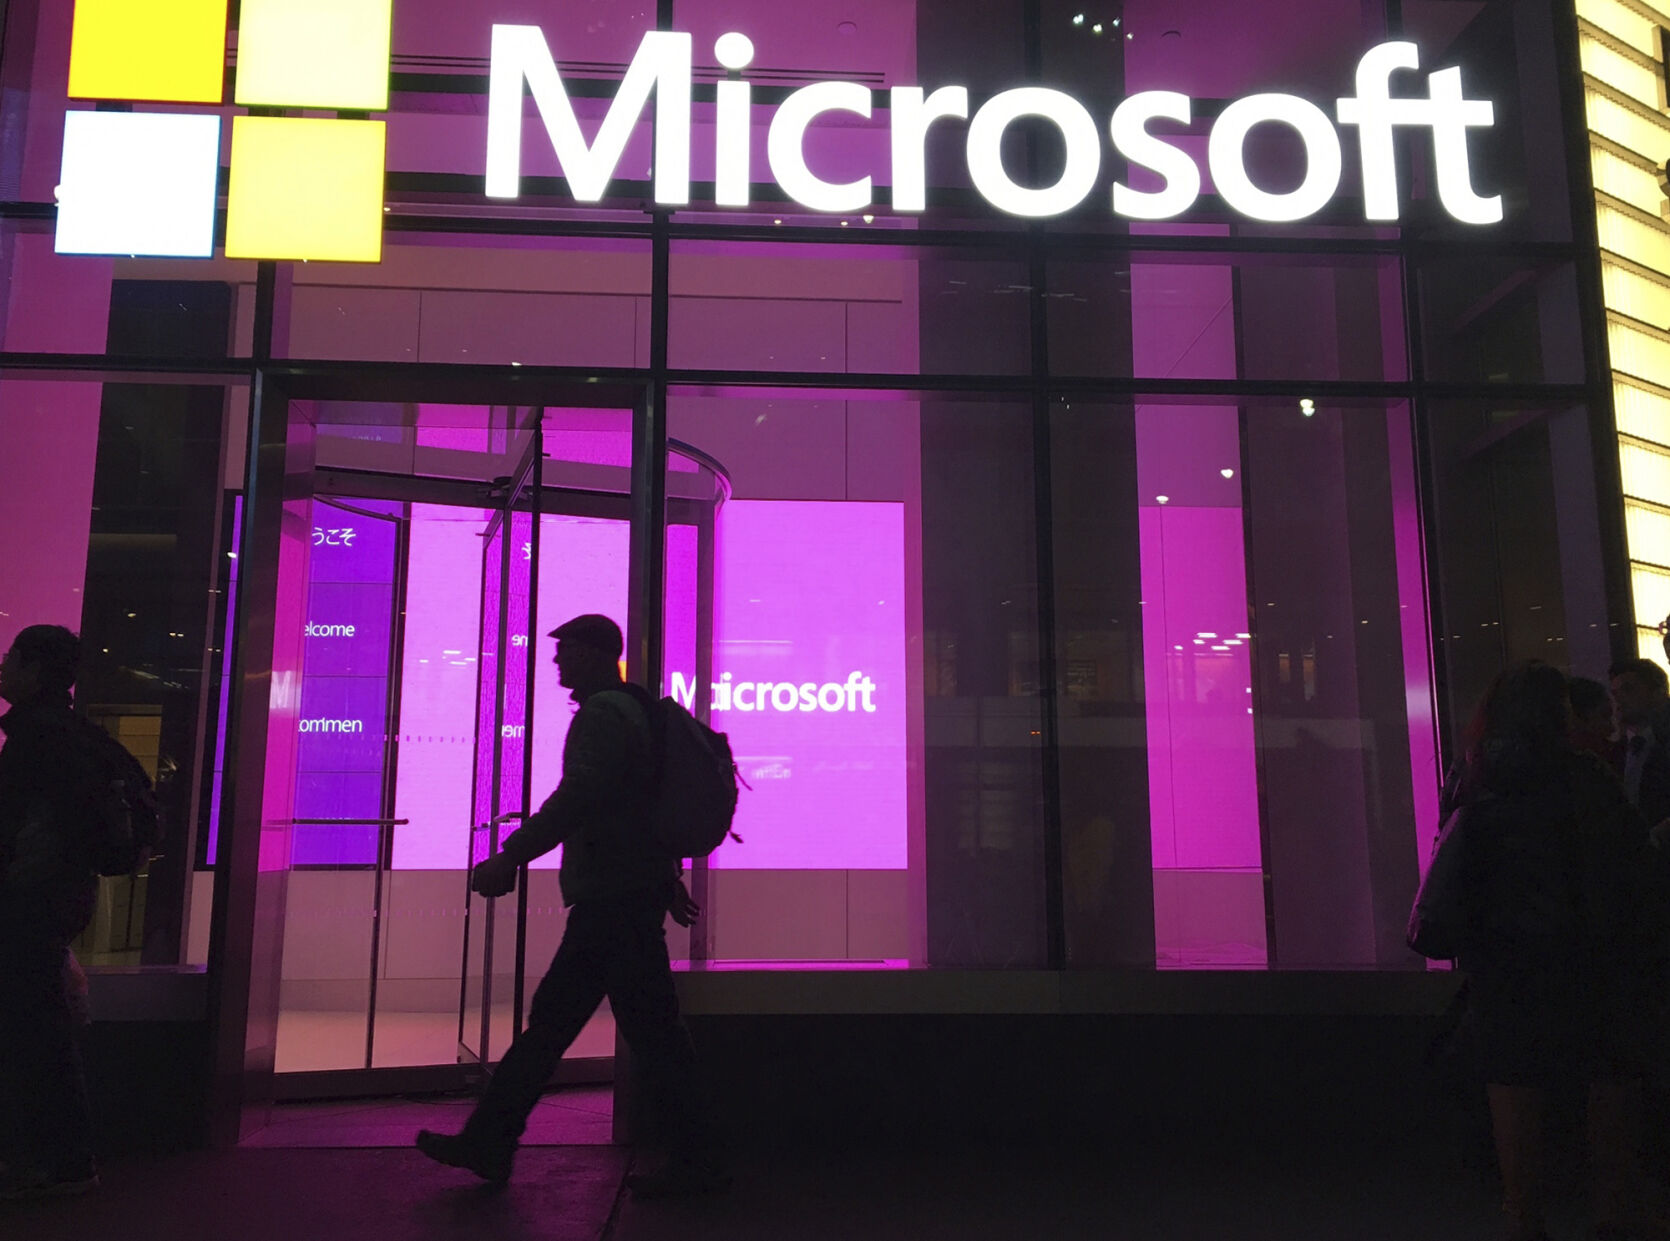 <p>FILE - People walk past a Microsoft office in New York, Nov. 10, 2016. On Tuesday, Jan. 24, 2023, Microsoft reported a 12% drop in profit for the October-December 2022 quarter, reflecting the economic uncertainty it said led to its decision to cut 10,000 workers. (AP Photo/Swayne B. Hall, File)</p>   PHOTO CREDIT: Swayne B. Hall 